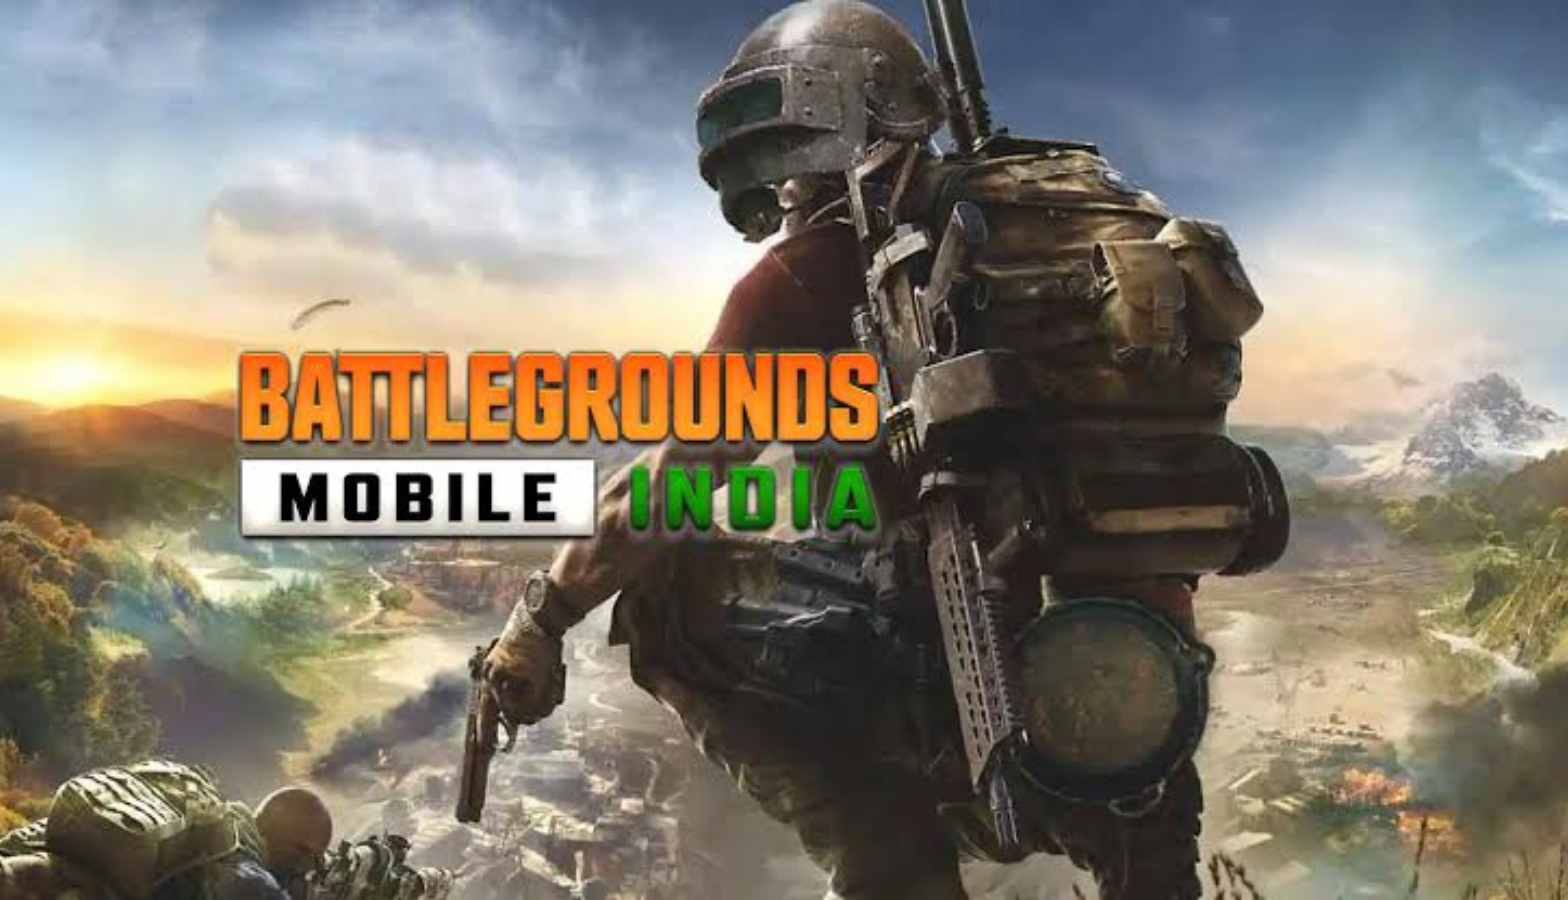 BGMI Unban Date: Is Battlegrounds Mobile India unban possible? CHECK DETAILS, all you need to know about the latest developments on BGMI Ban in India.